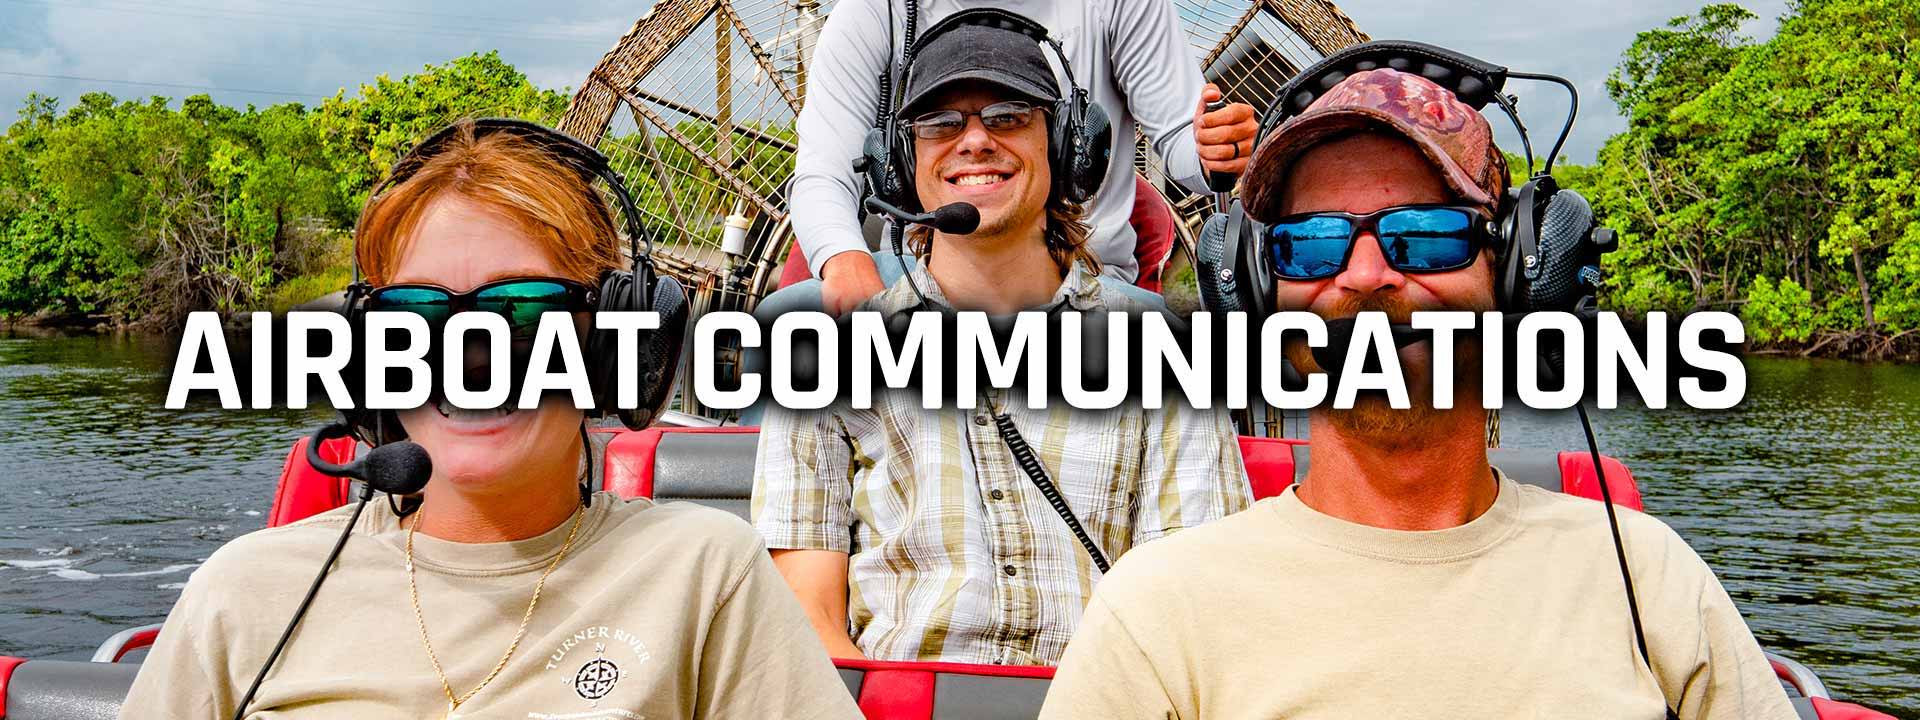 airboat headset and intercom communications